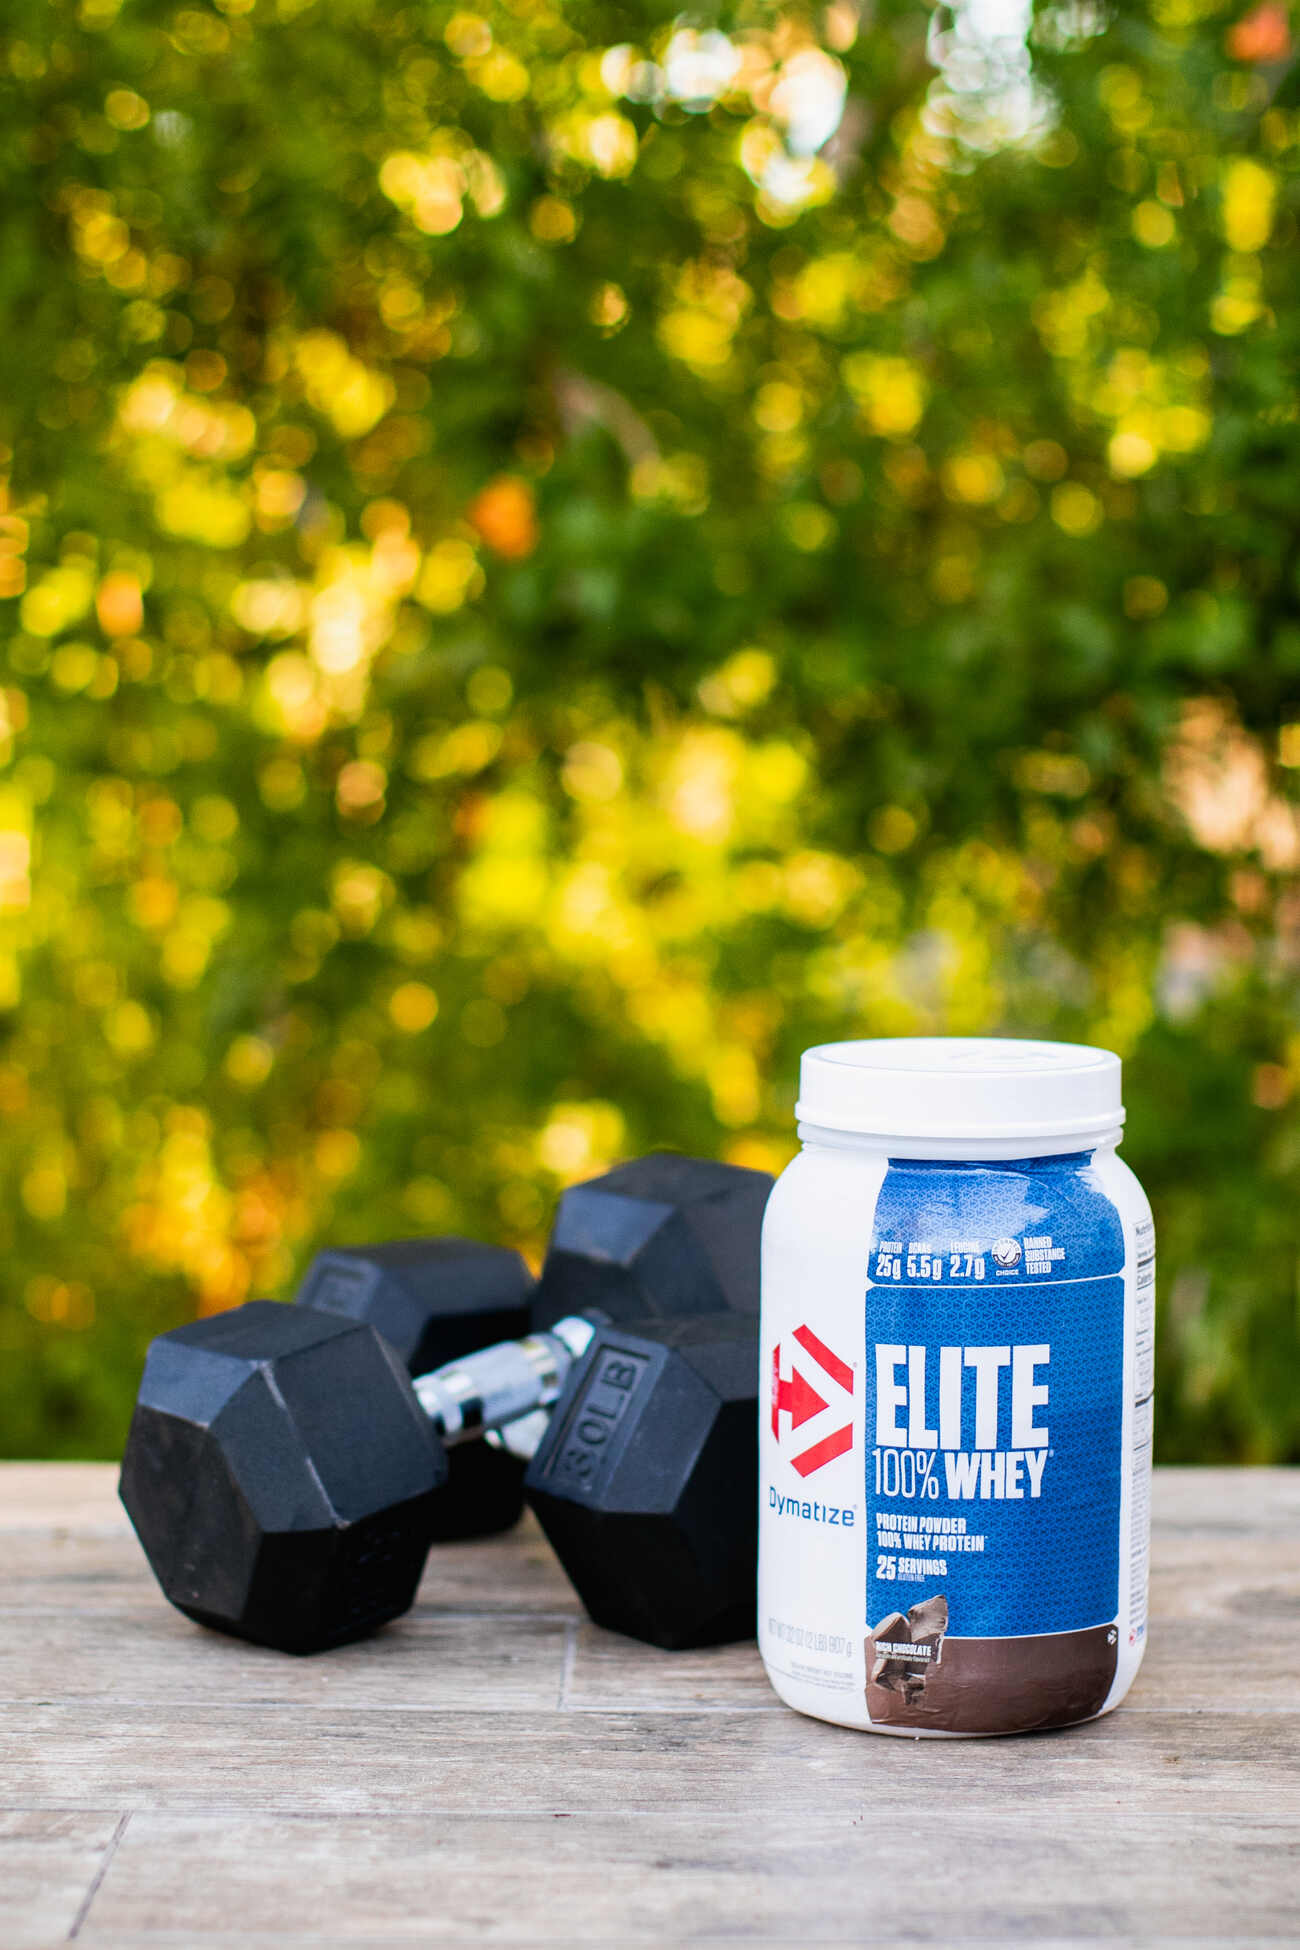 A protein powder jar next to dumbbells on a wooden surface outdoors